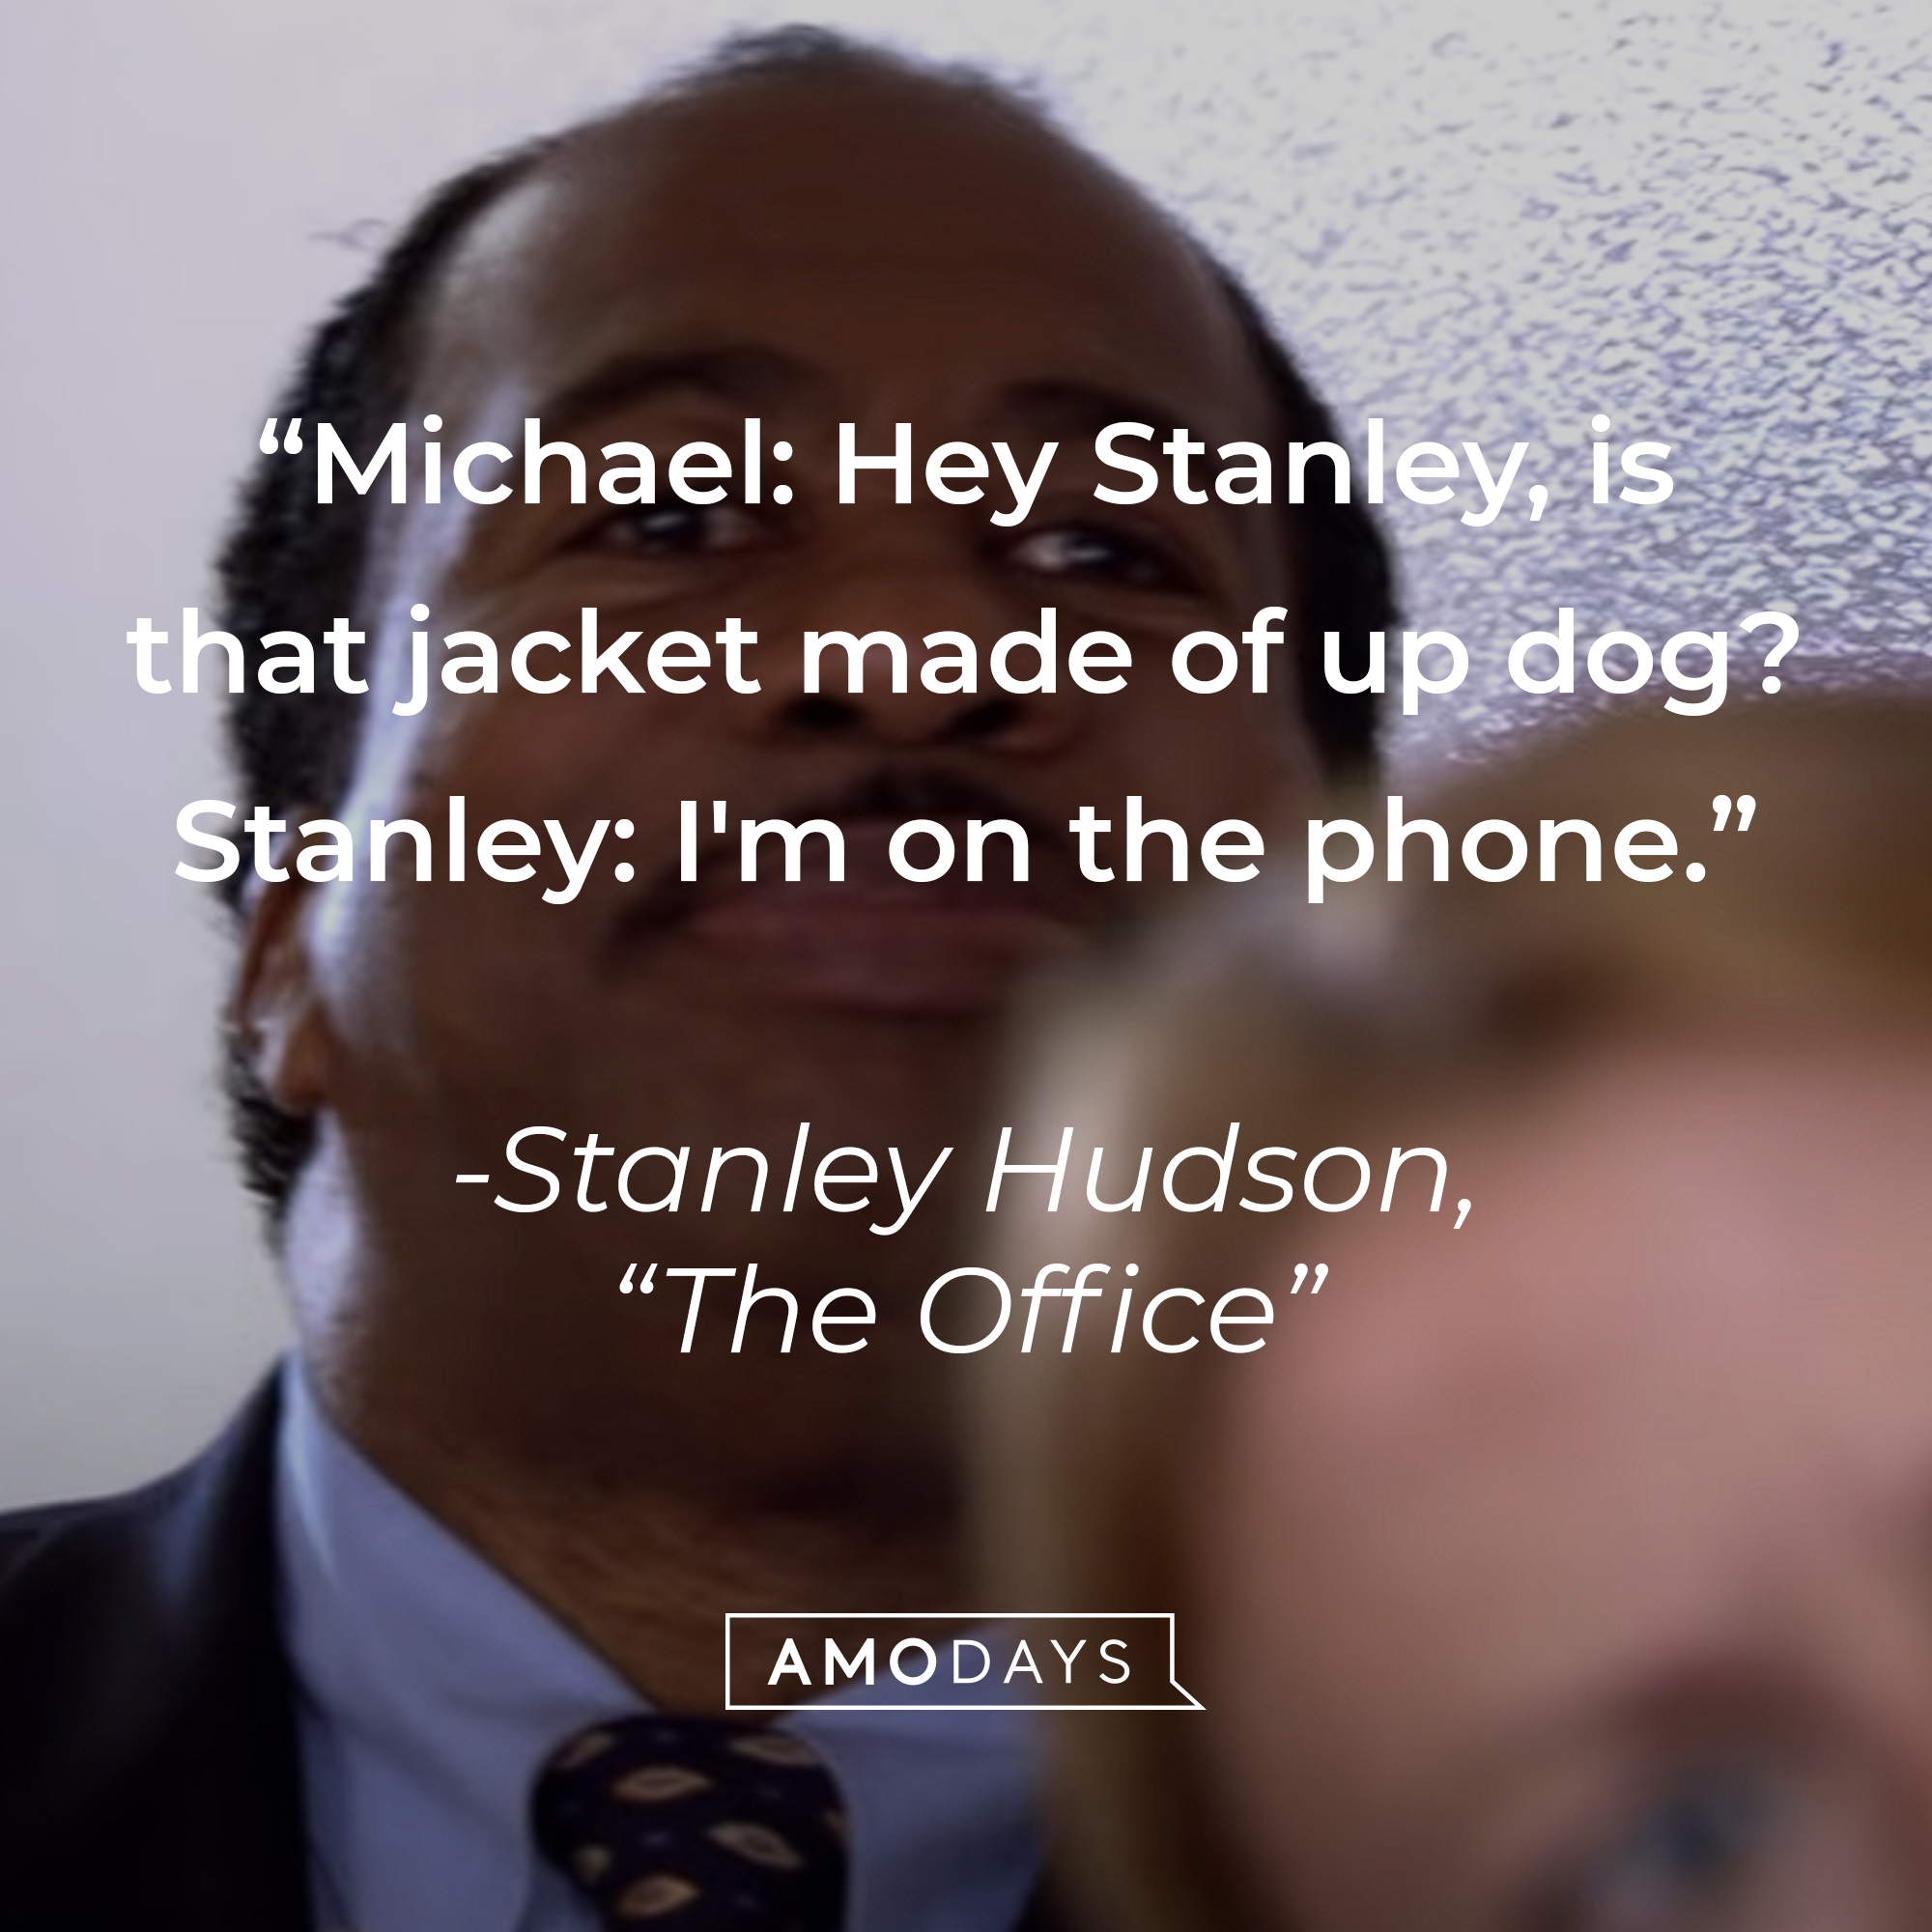 An image of Leslie David Baker as Stanley Hudson in "The Office" with the dialogue: "Michael: Hey Stanley, is that jacket made of up dog? Stanley: I'm on the phone." | Source: youtube.com/The Office